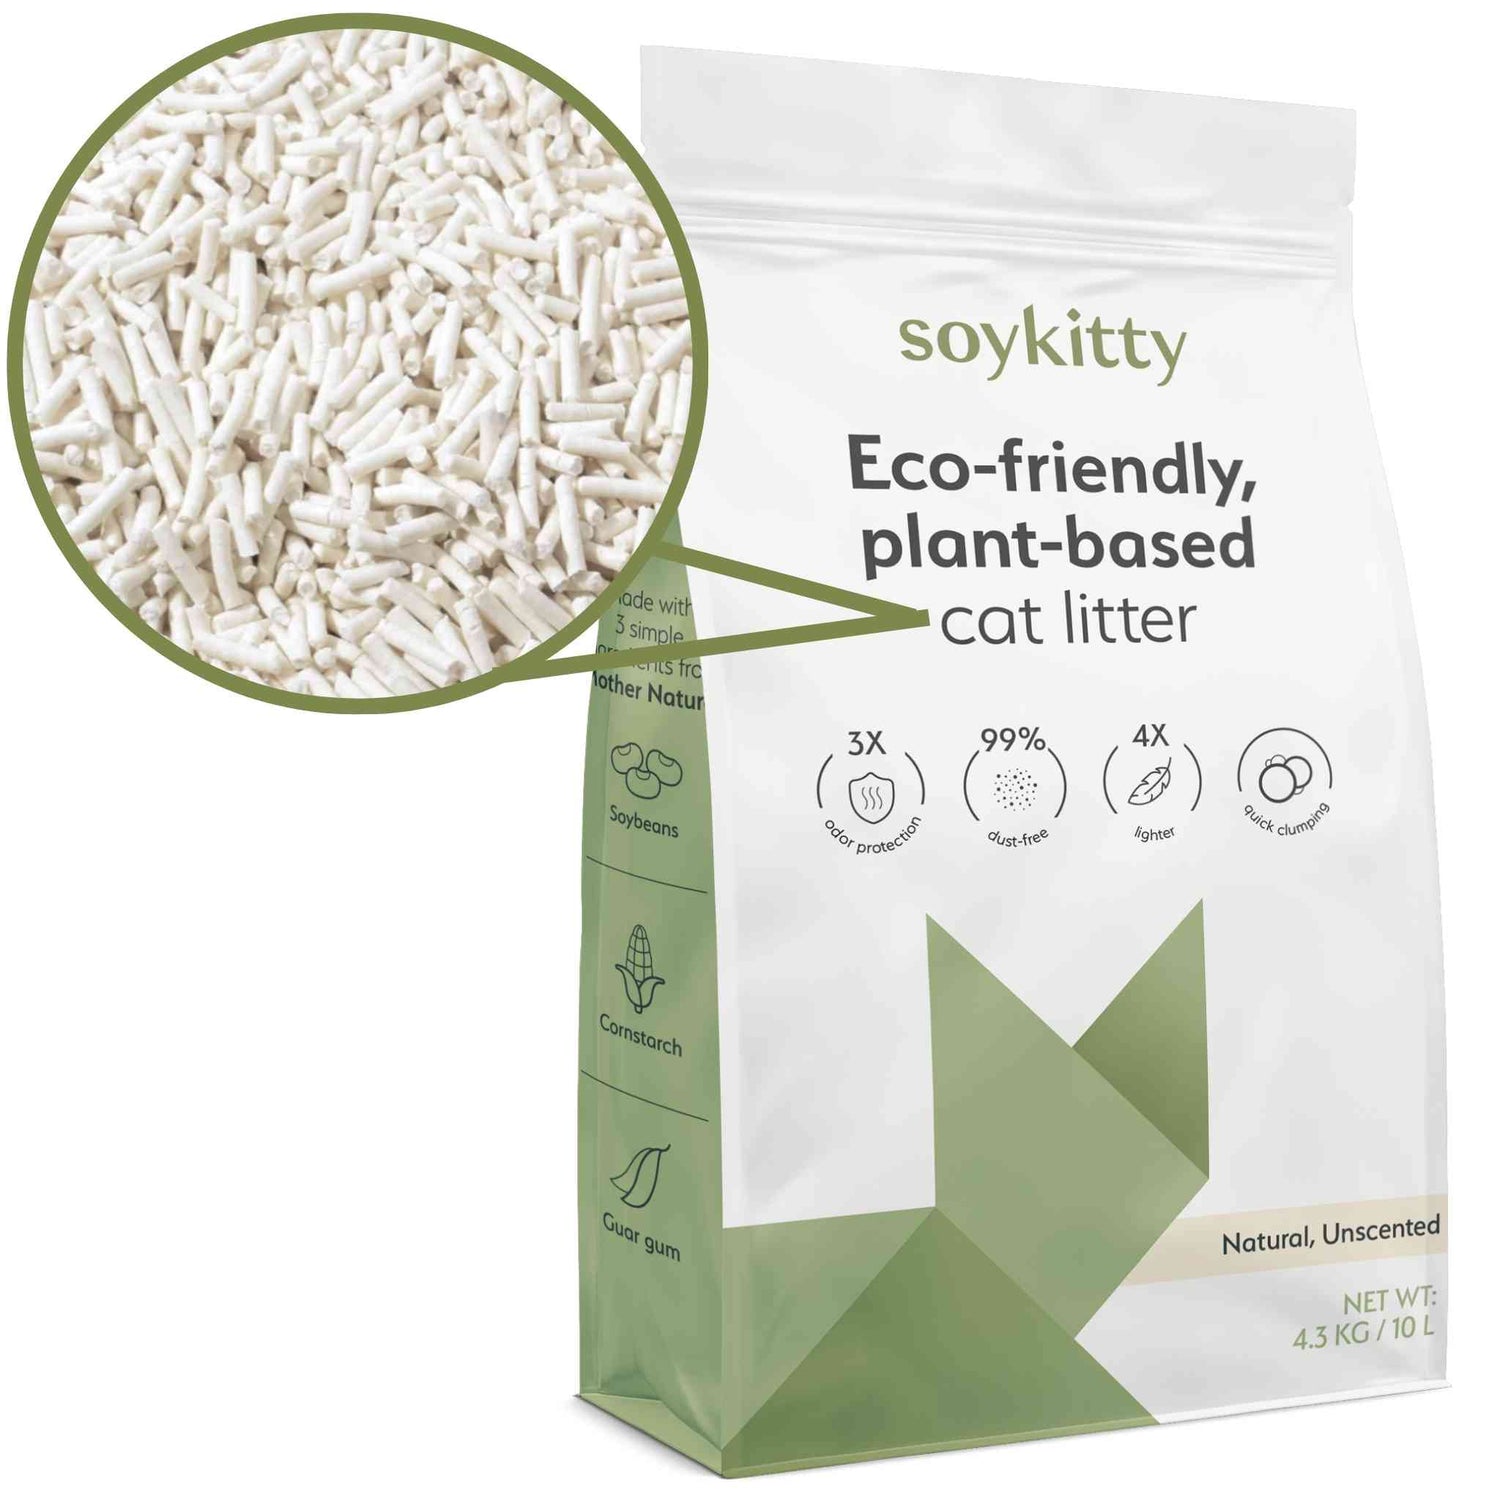 1 bag of SoyKitty eco-friendly plant-based cat litter with a close up view of natural, unscented pellets, highlighting features like odor protection, dust-free formula, lightweight, and tight clumping ability.